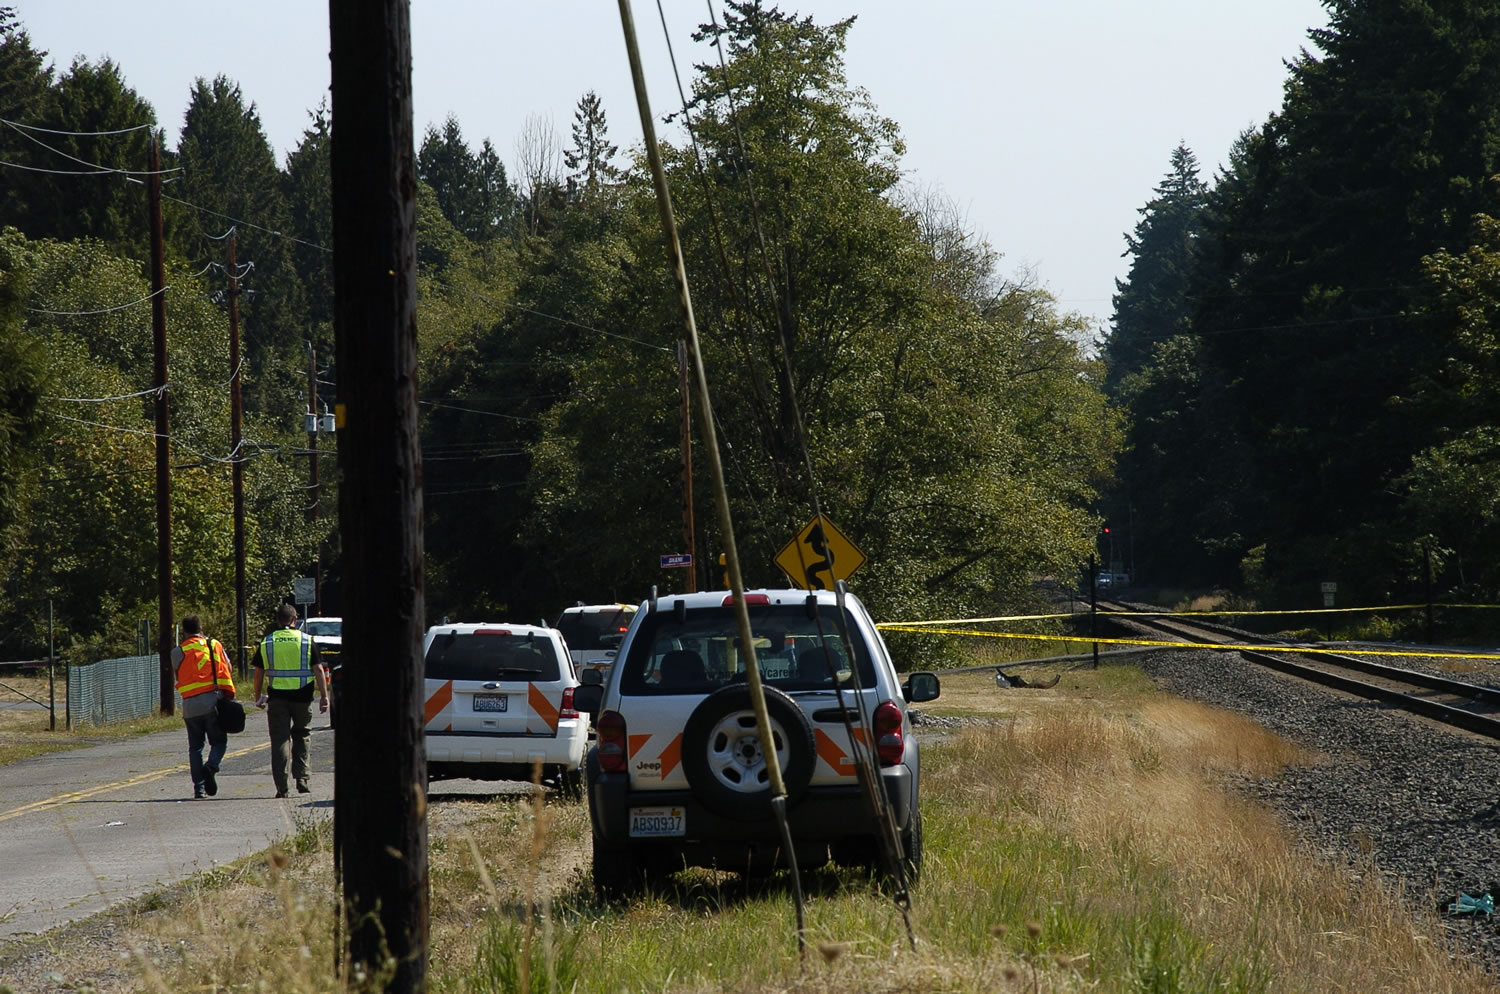 Emergency officials respond to the scene where an Amtrak train collided with an SUV Sunday morning in Vancouver, killing the man who was driving the SUV.